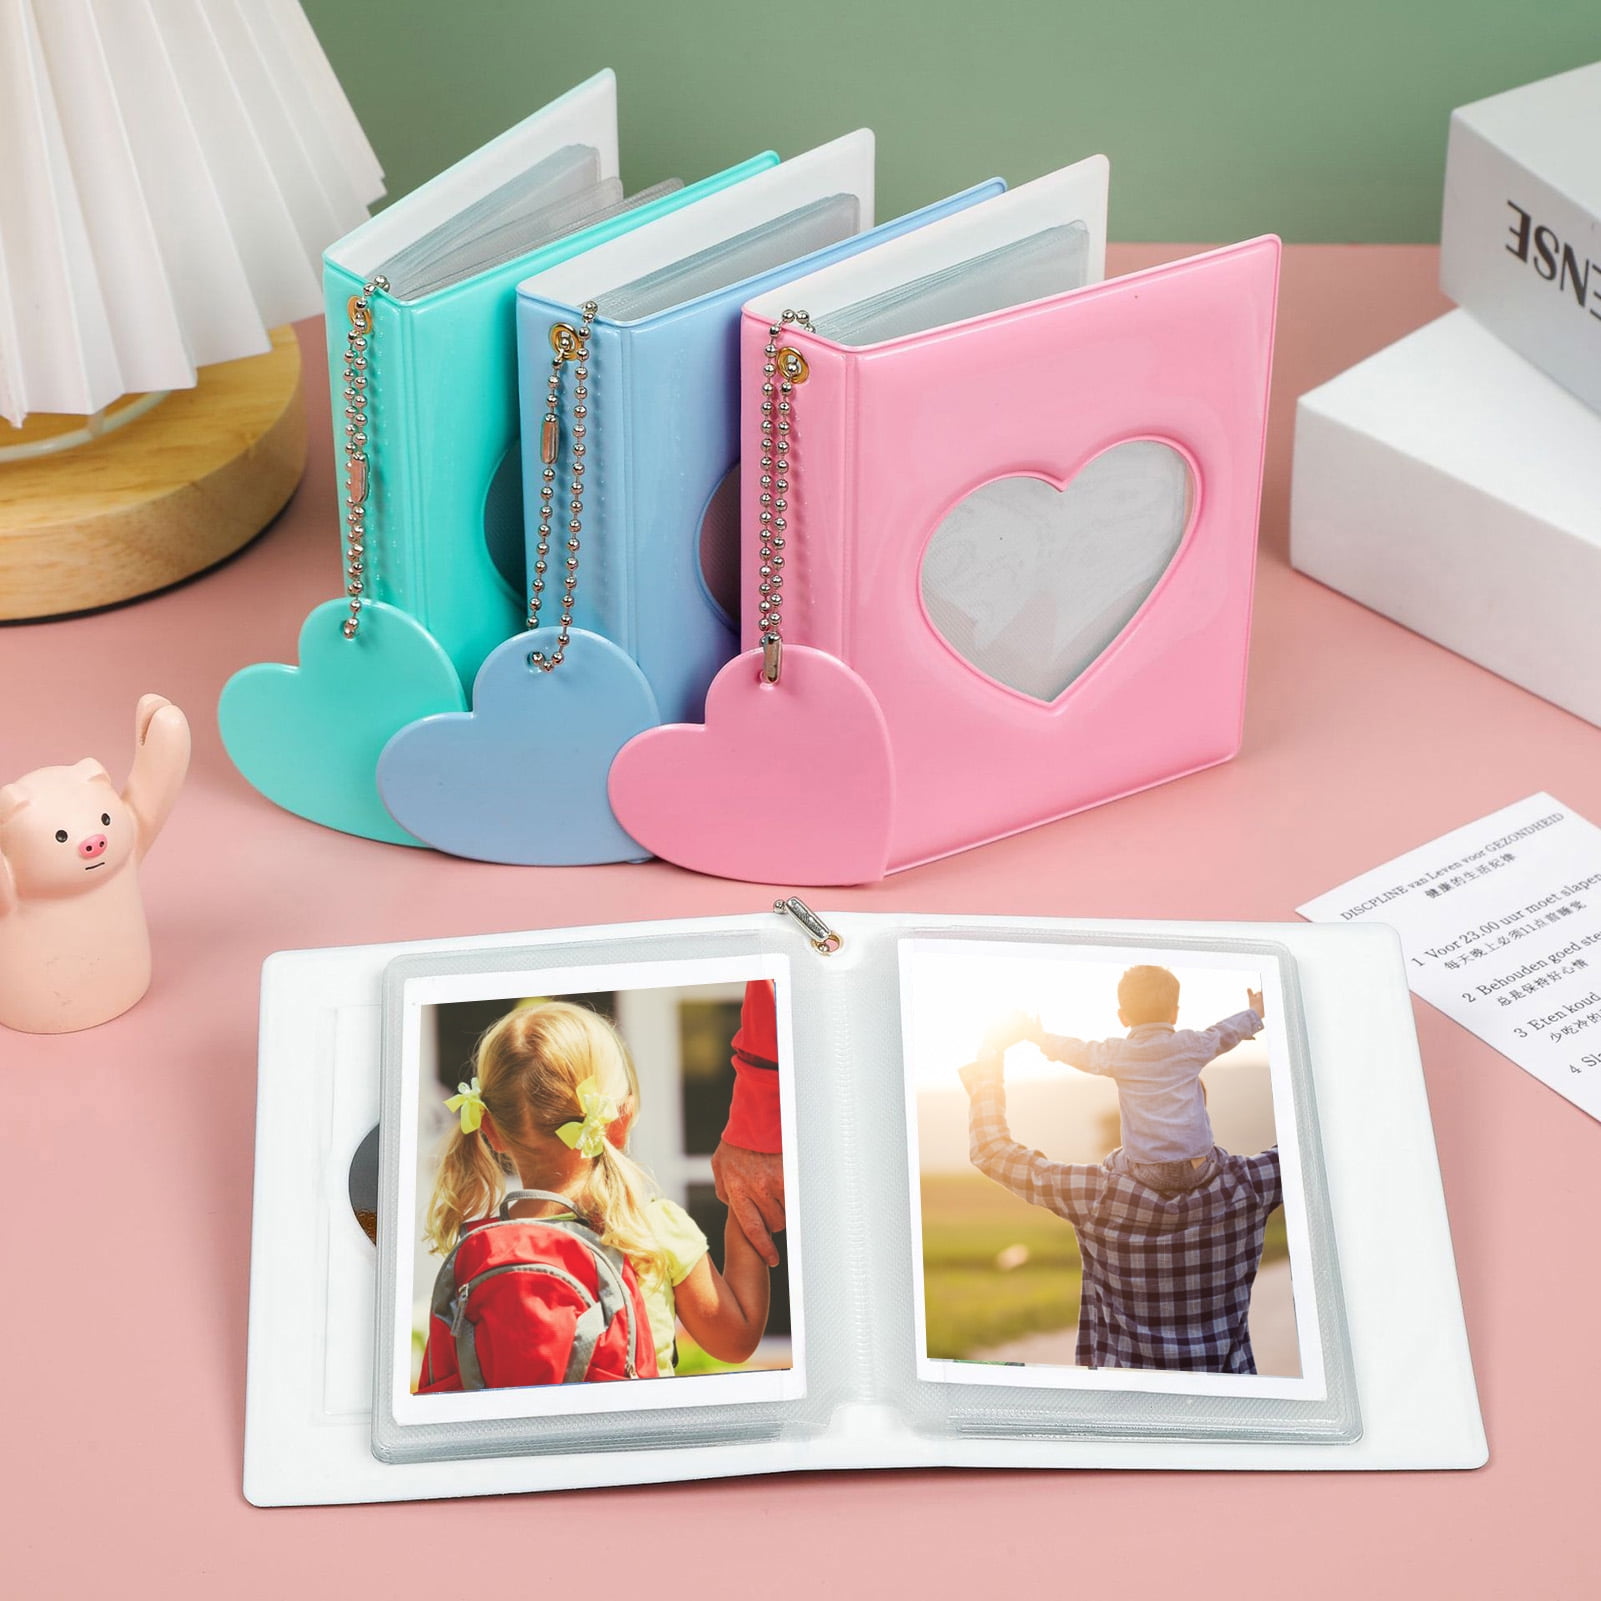 1pc Keychain Photo Album For Mini Photo Sticker Jelly Color Card Holder 2  Inch Photos Holder Portable Key Chain Wholesale